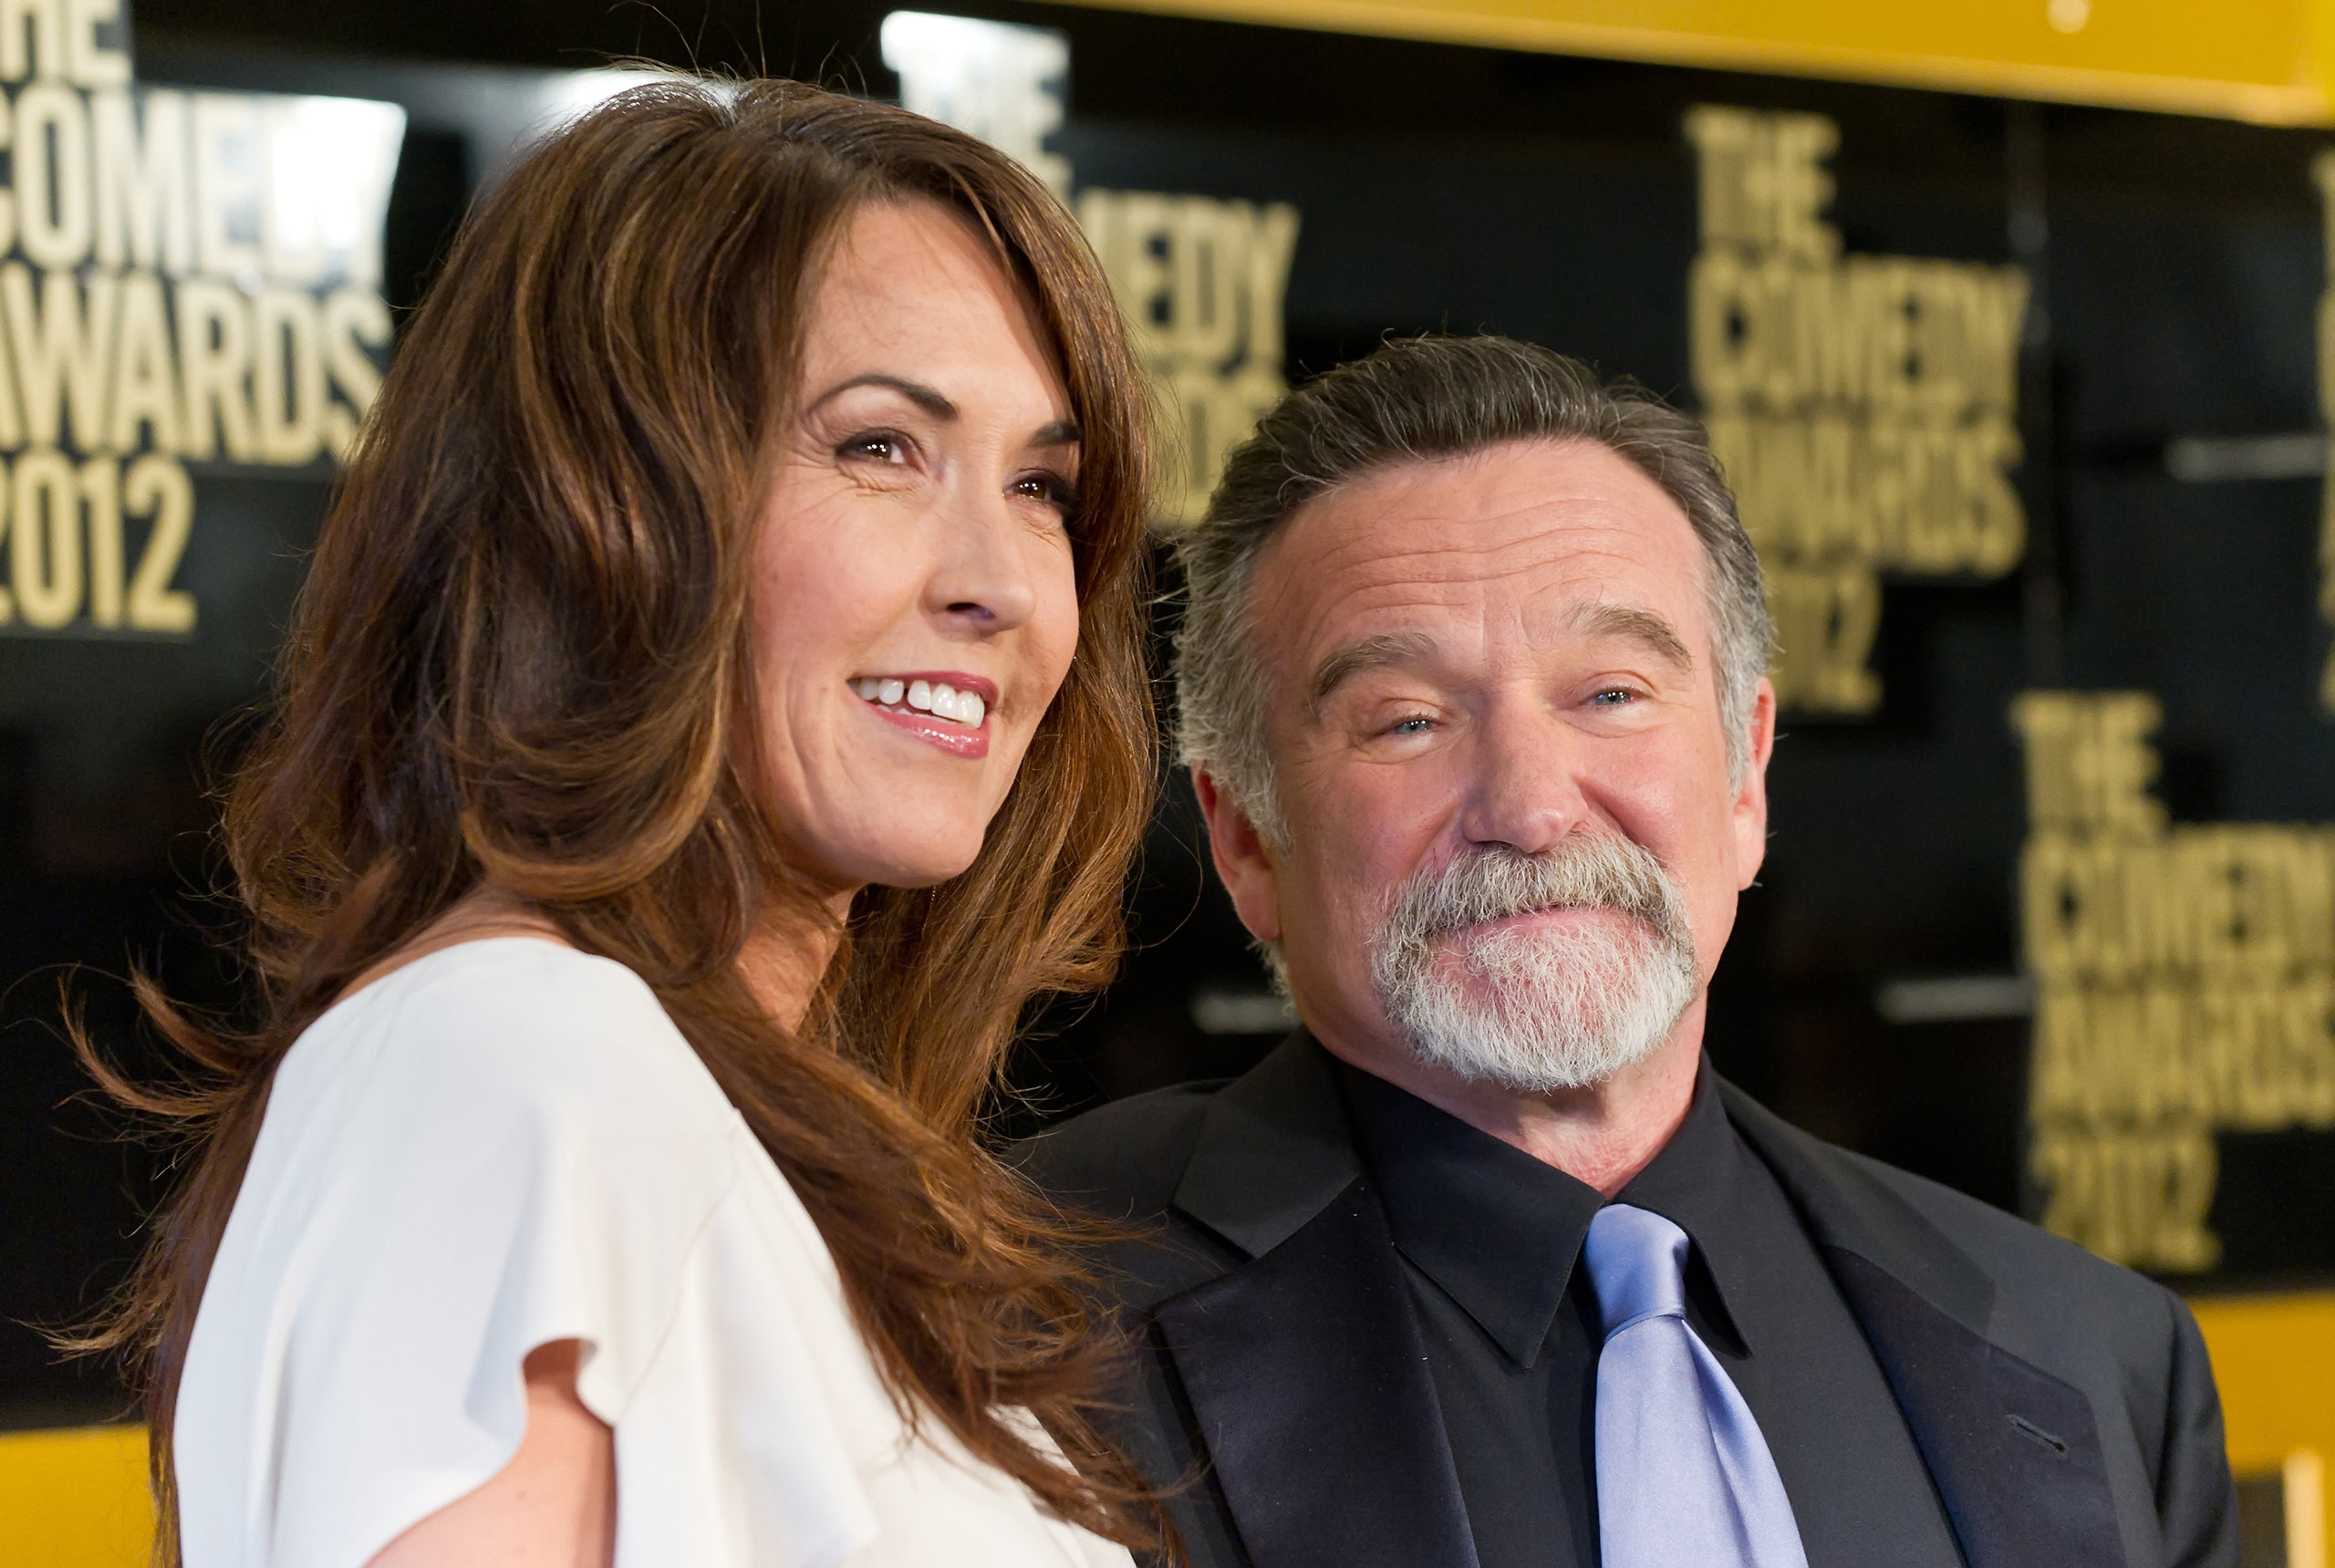 Susan Schneider and comedian Robin Williams attend The Comedy Awards 2012 at Hammerstein Ballroom  in New York City on April 28, 2012. (Gilbert Carrasquillo—FilmMagic/Getty Images)